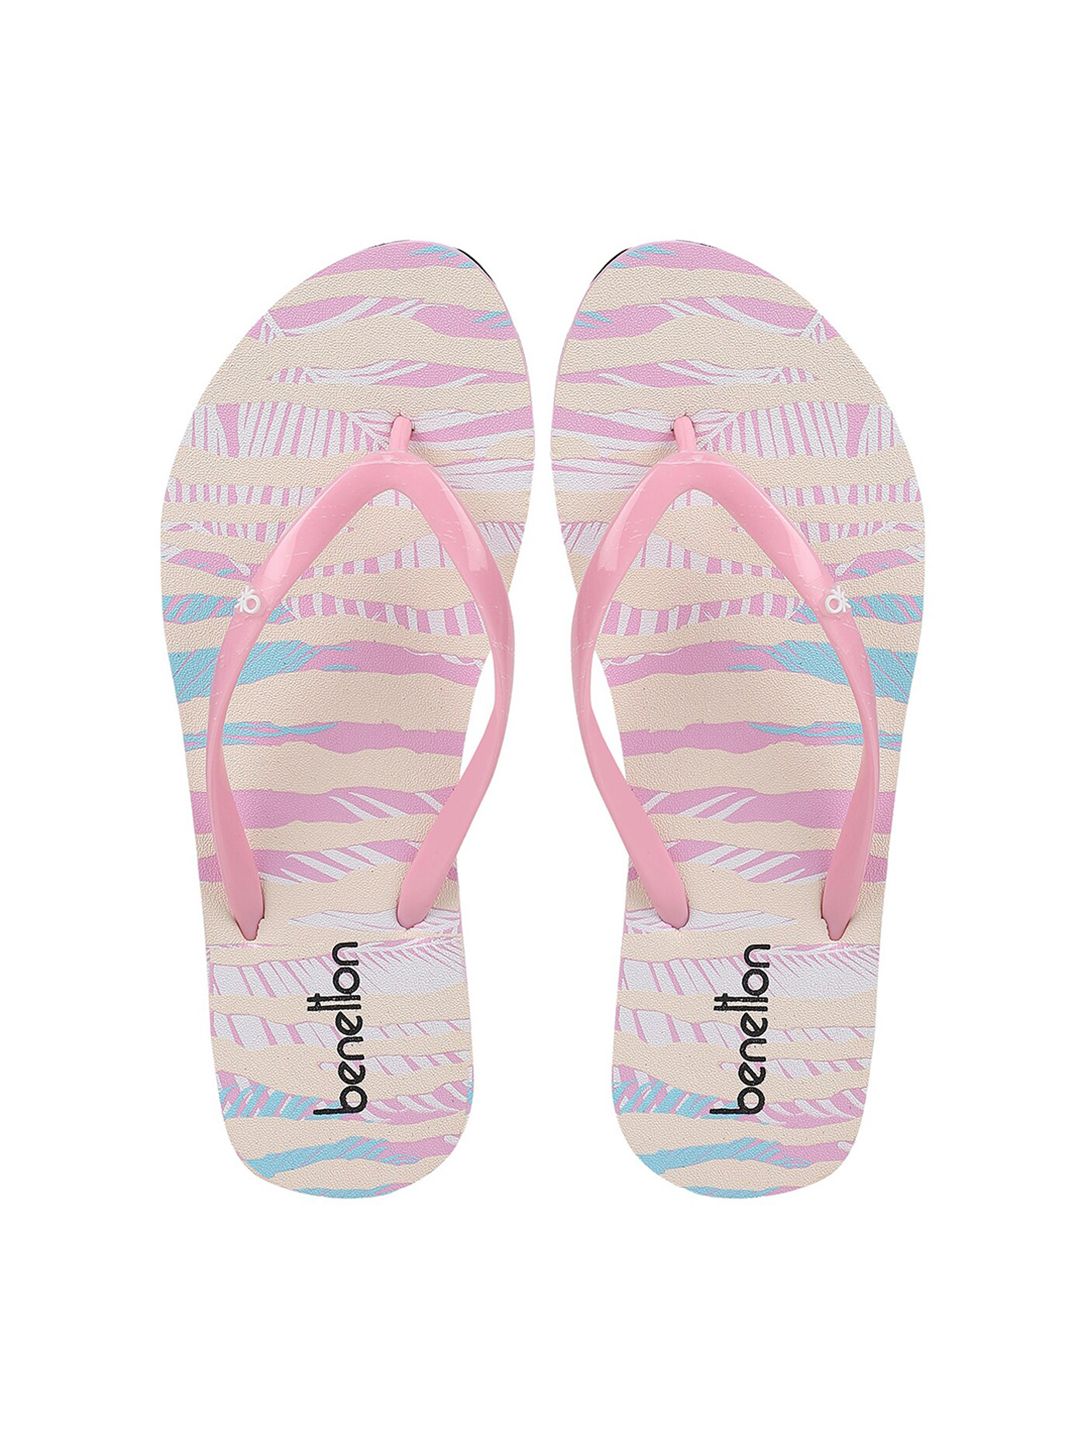 United Colors of Benetton Women Pink & White Printed Rubber Thong Flip-Flops Price in India